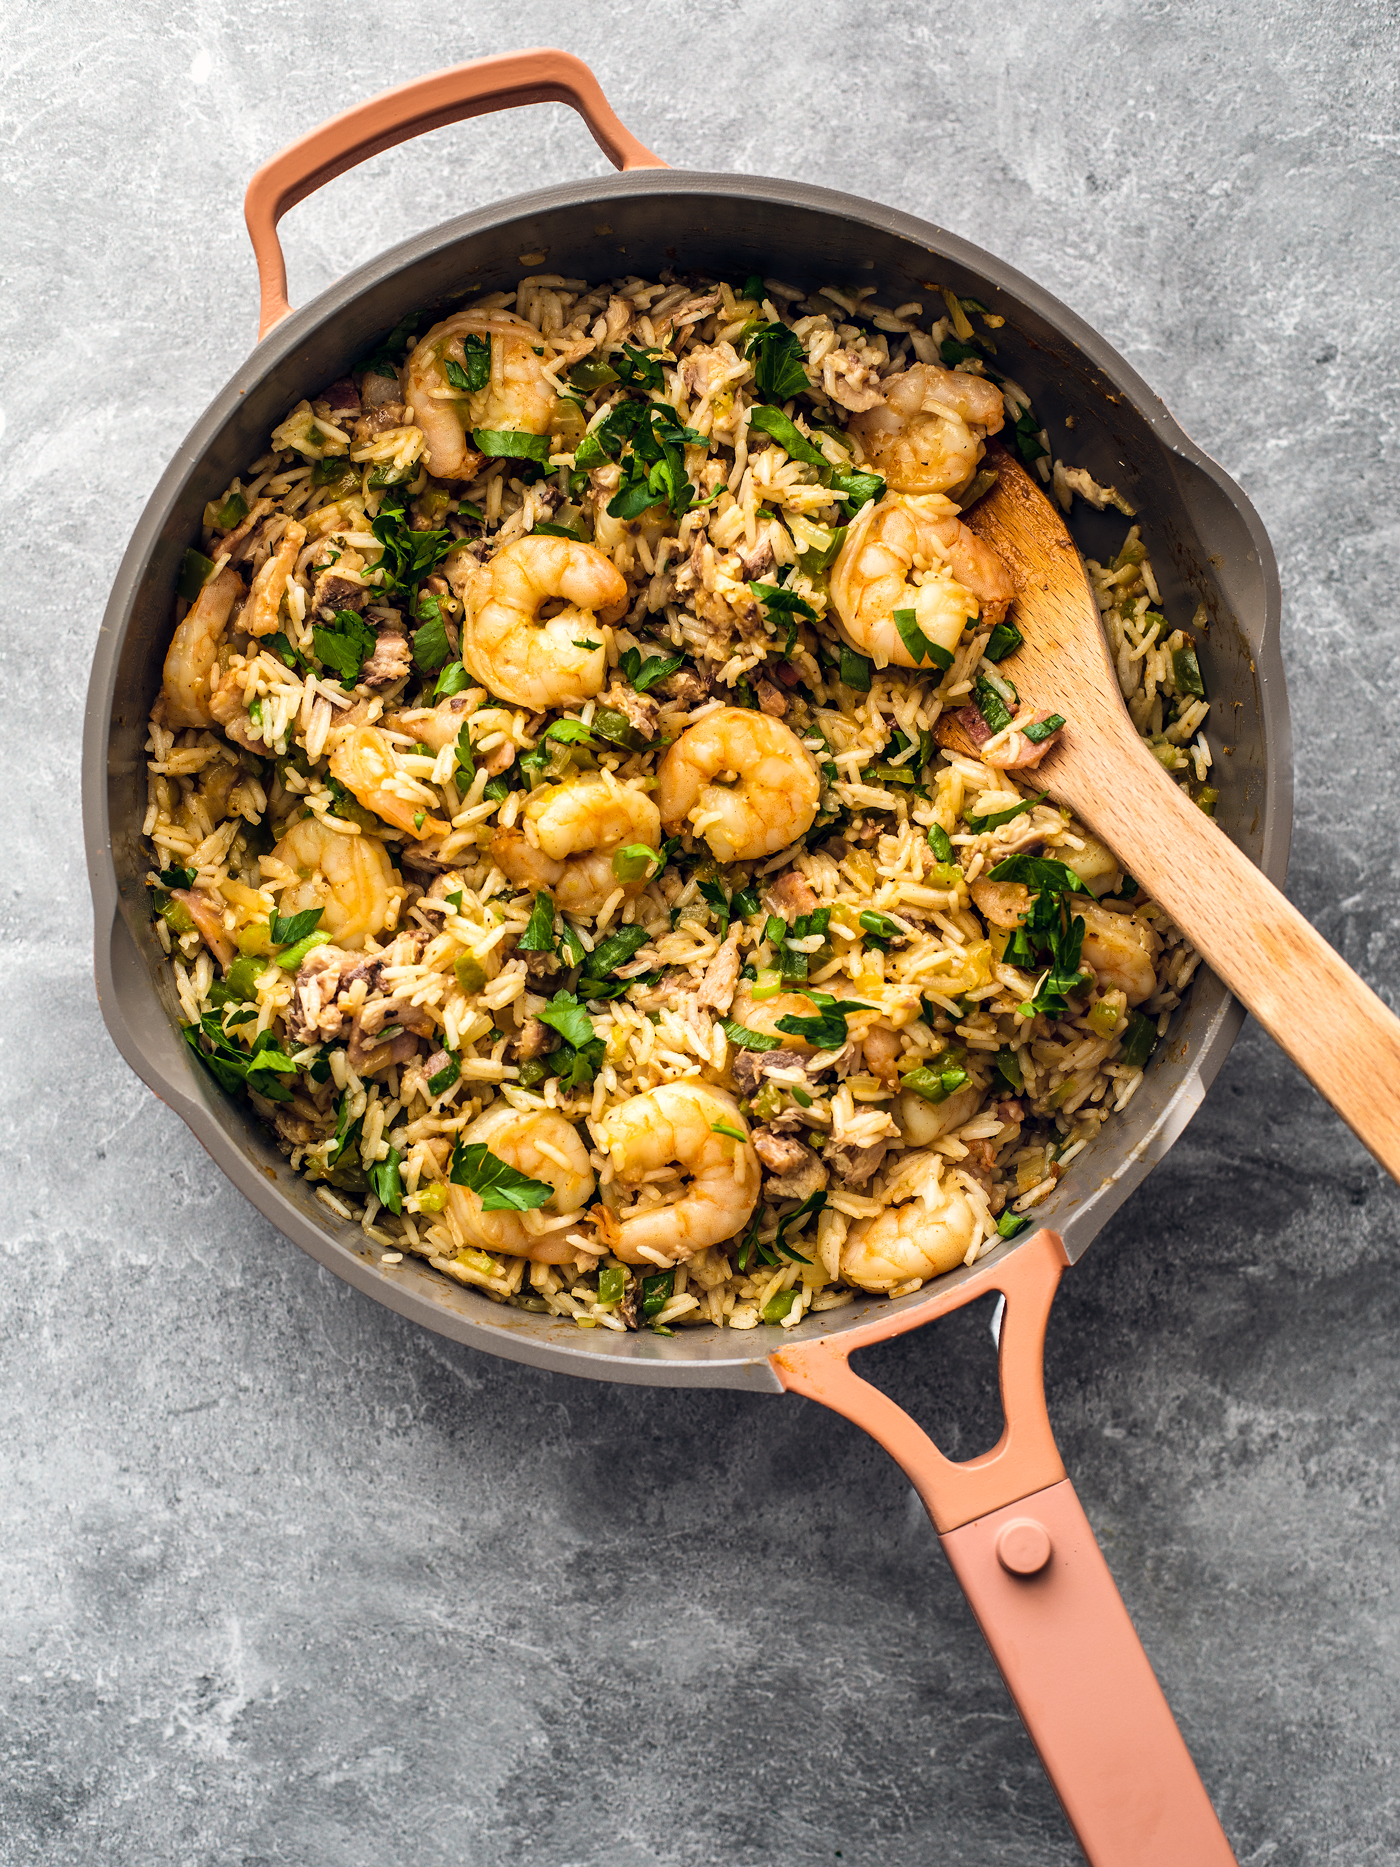 Pan full of dirty rice and shrimp, garnished with fresh parsley.